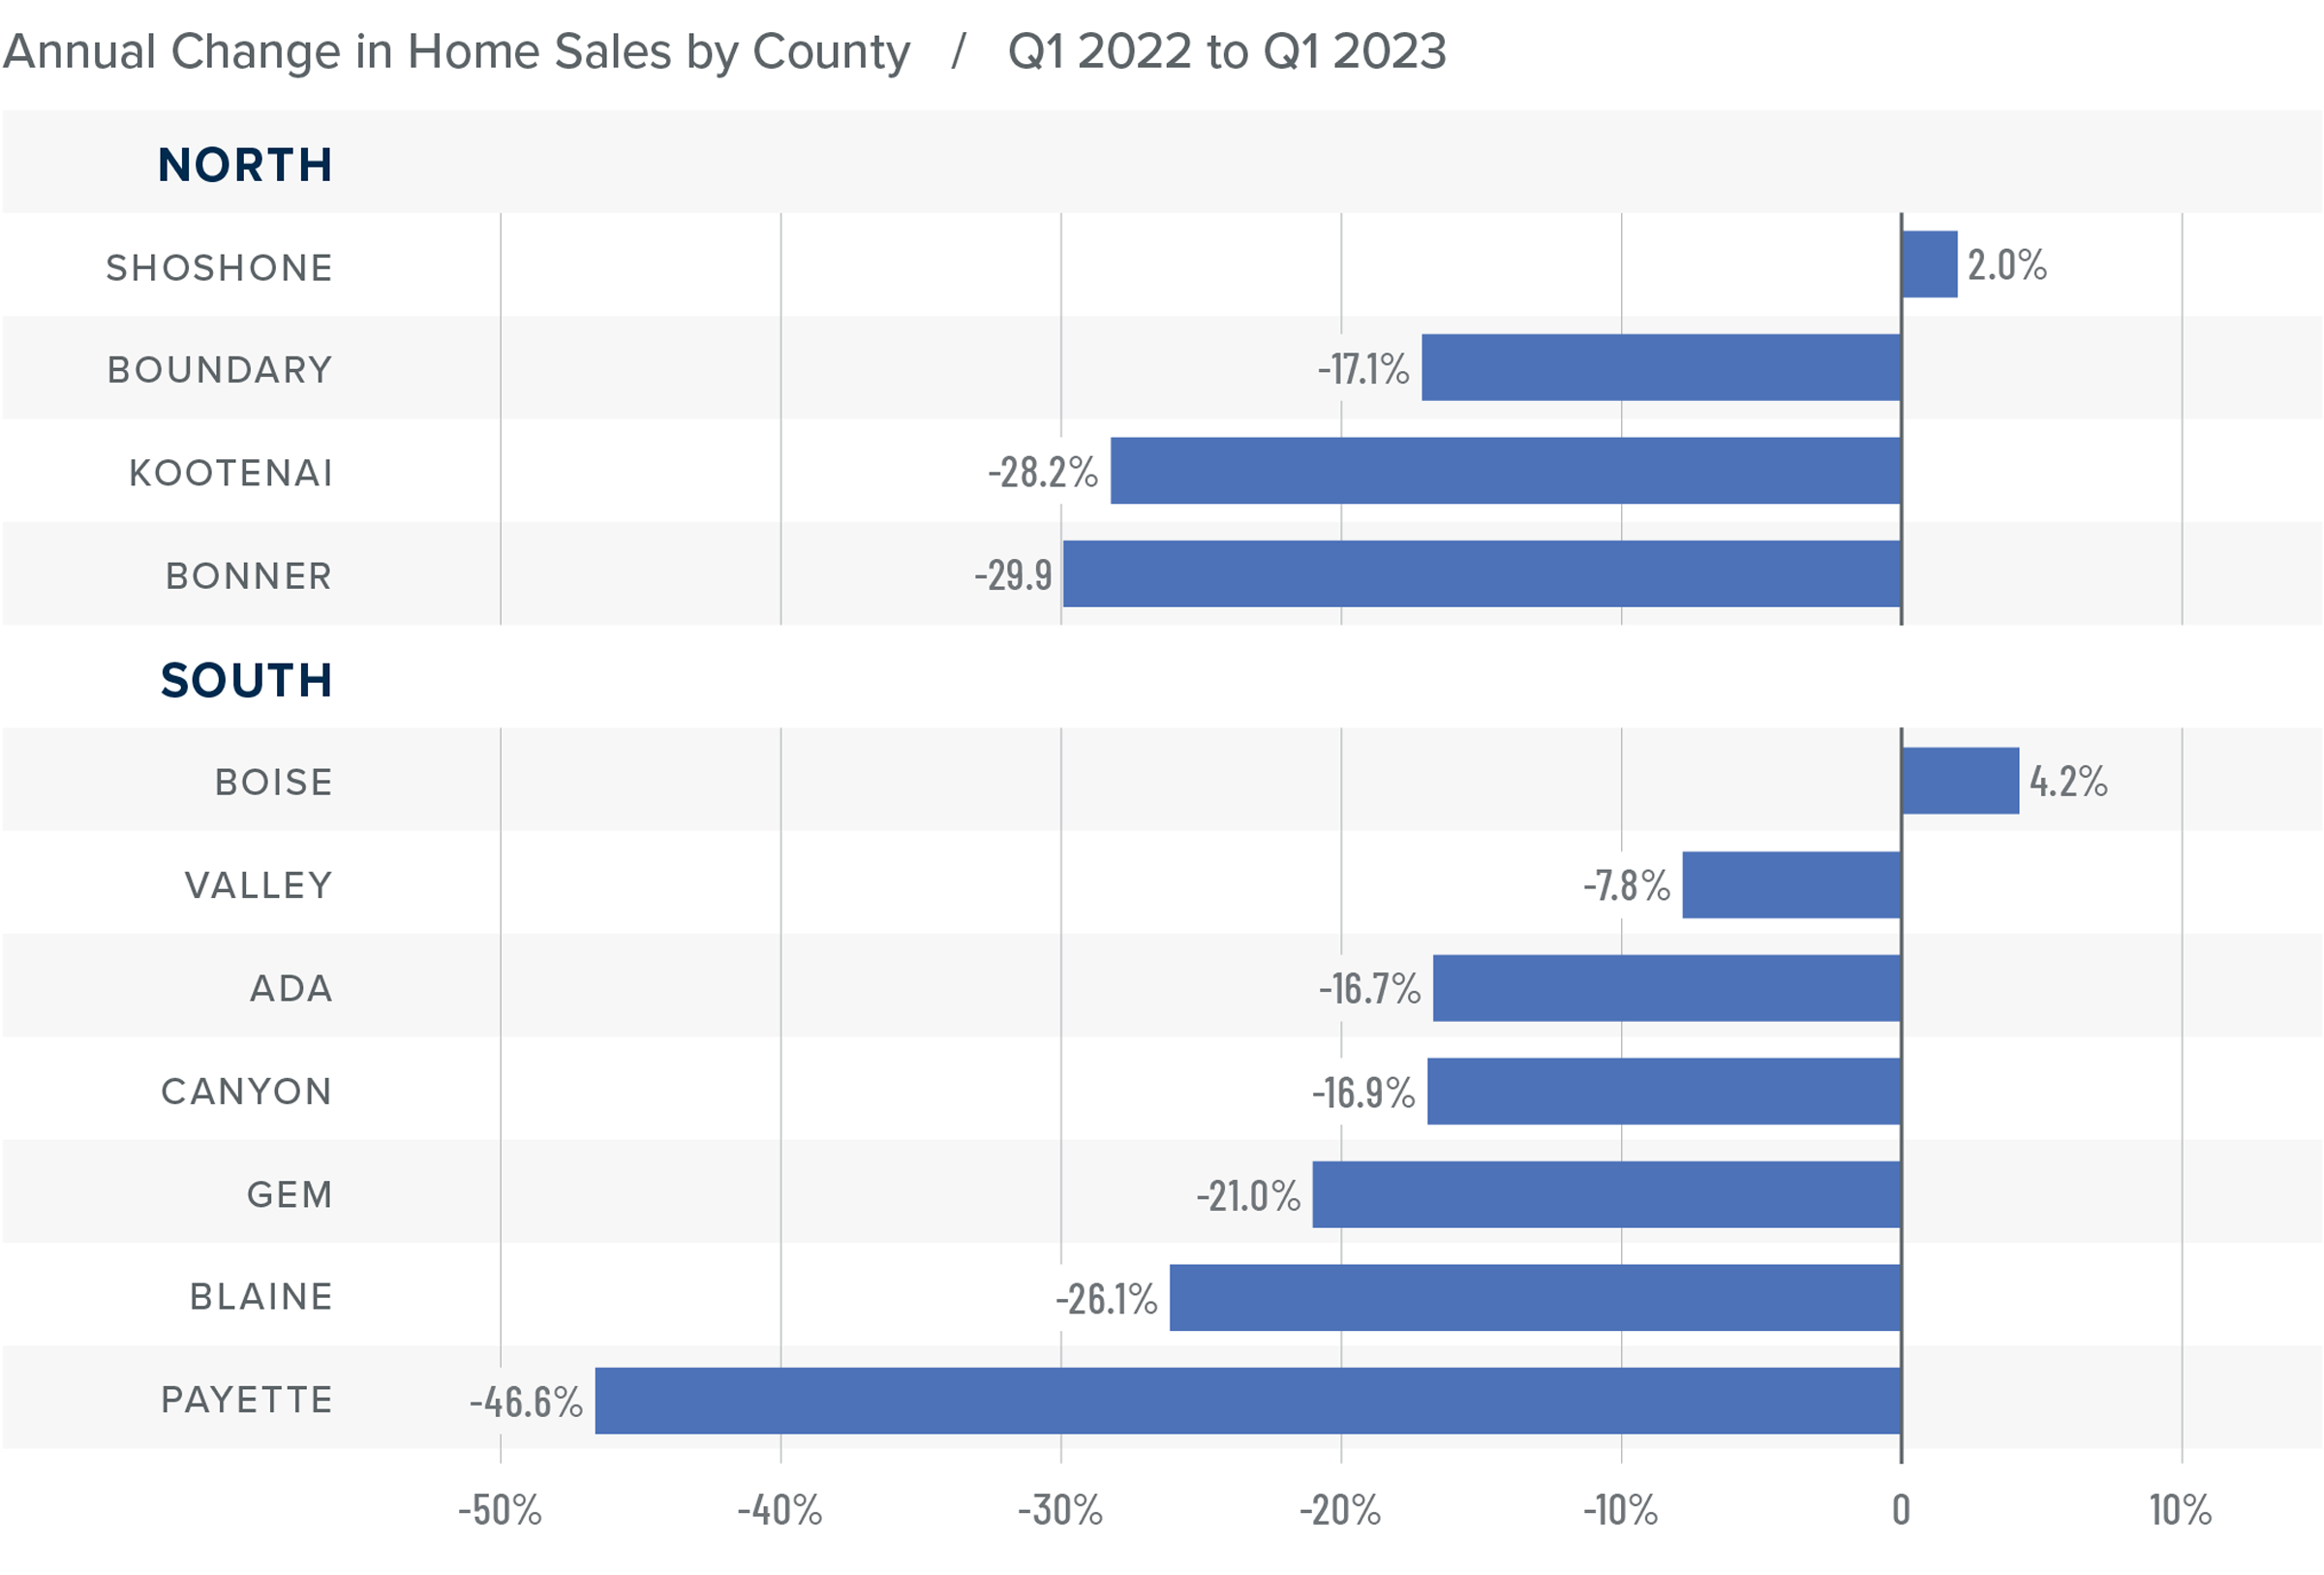 A bar graph showing the annual change in home sales for various counties in North and South Idaho from Q1 2022 to Q1 2023. All counties have a negative percentage year-over-year change, except Shoshone at 2% and Boise at 4.2%. Here are the remaining numbers: Boundary at -17.1%, Kootenai at -28.2%, Bonner -29.9%, Valley -7.8%, Ada -16.7%, Canyon -16.9%, Gem -21%, Blaine -26.1%, and Payette -46.6%.